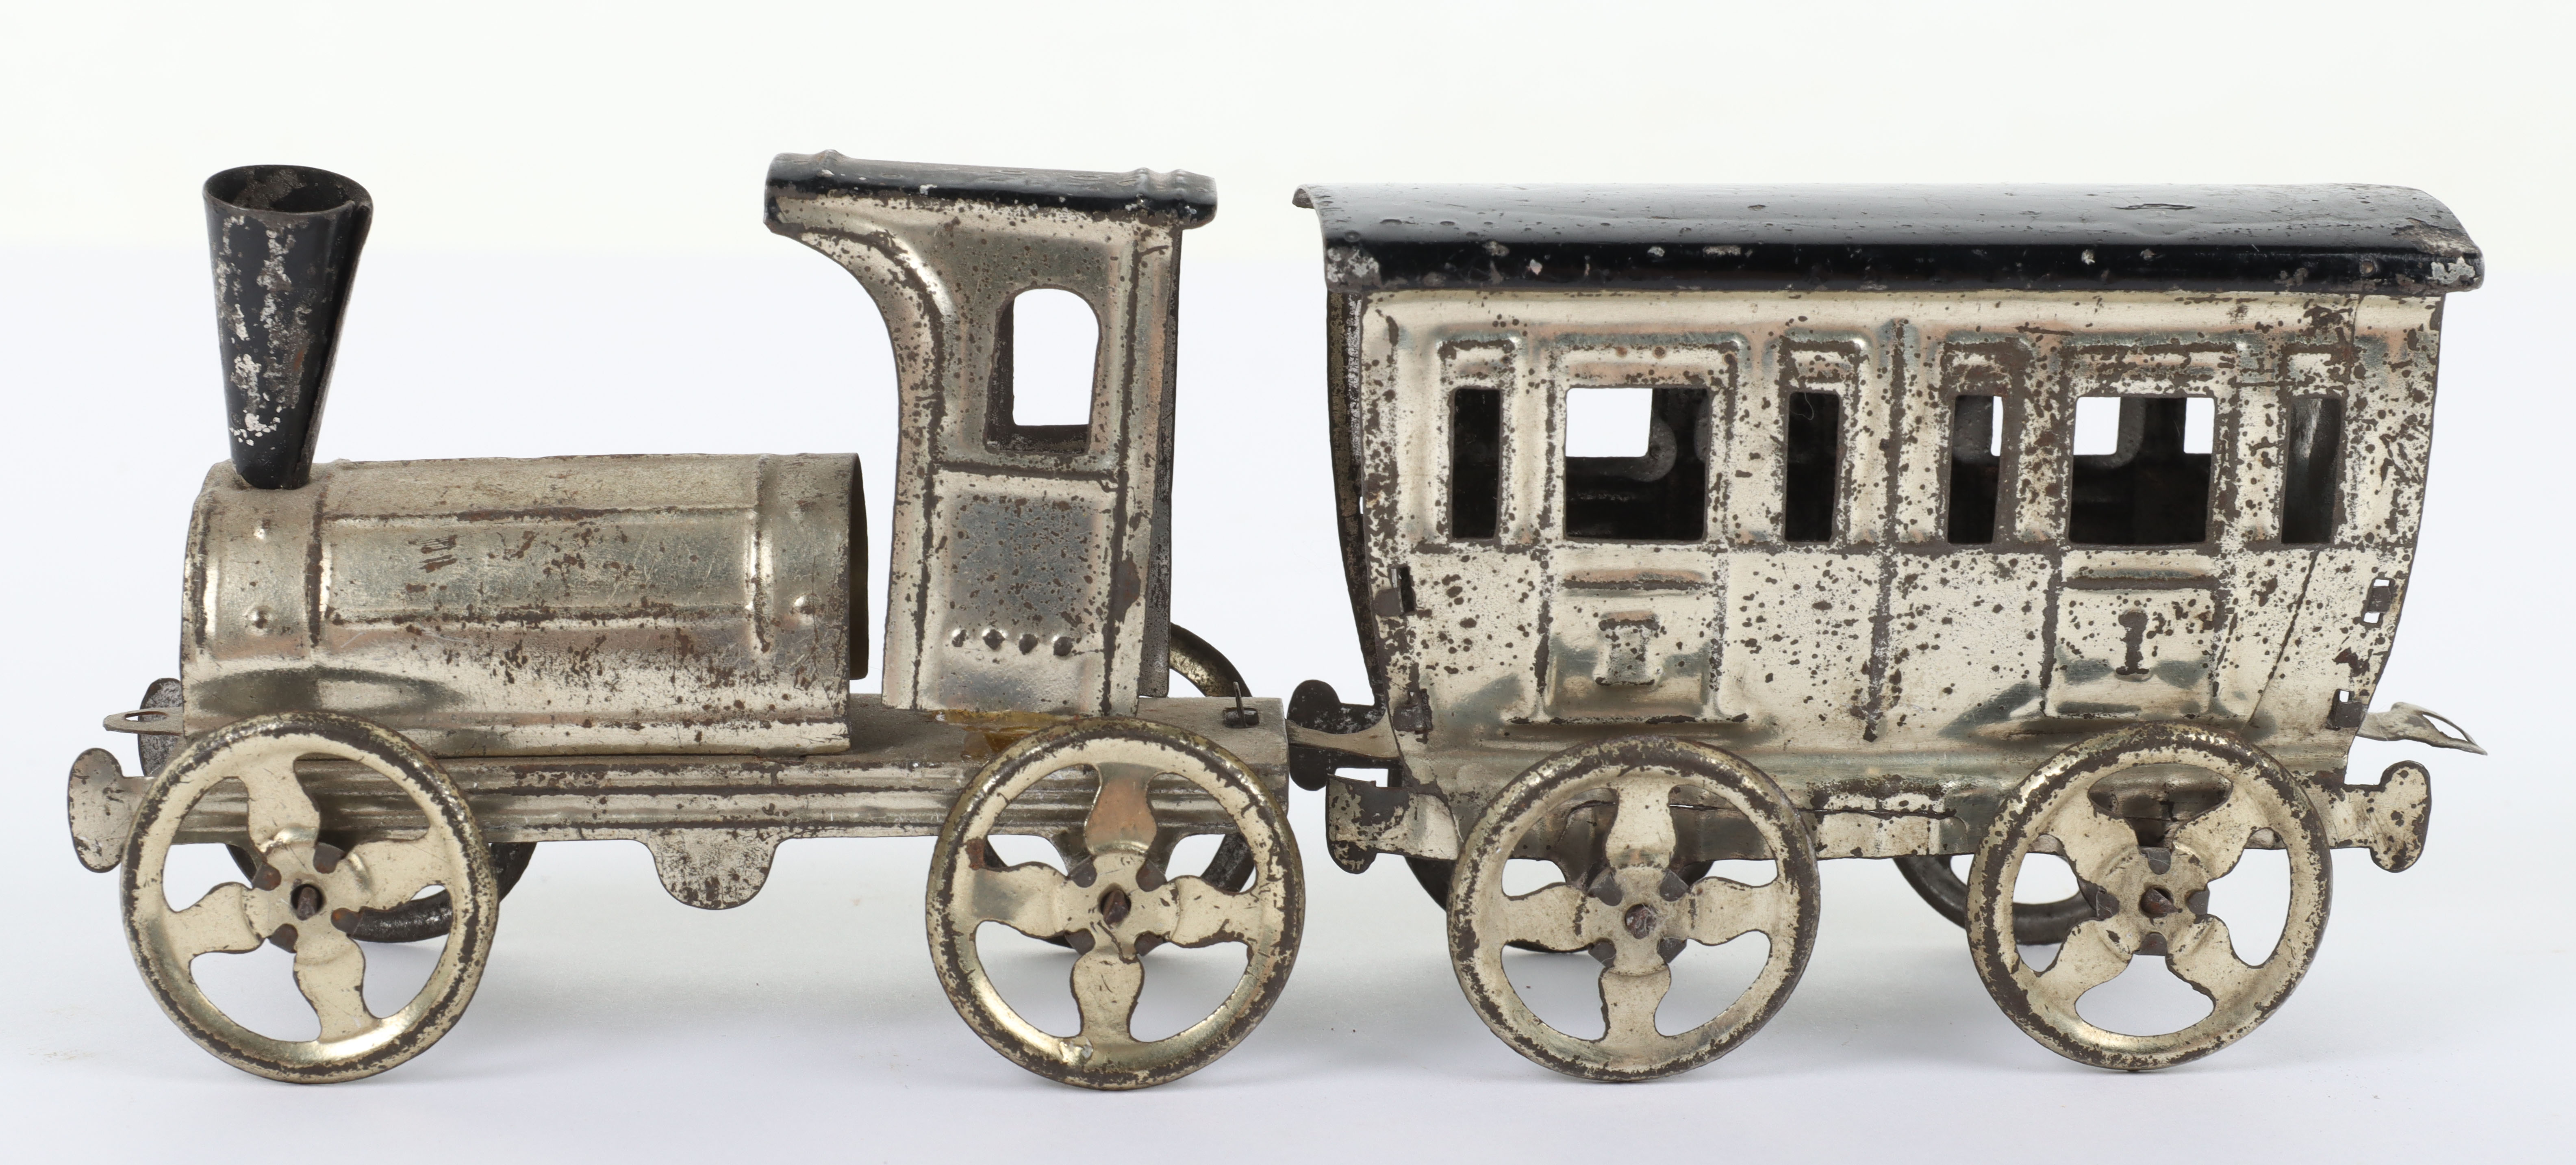 Early Meier pressed tinplate locomotive and carriage penny toy, German circa 1900